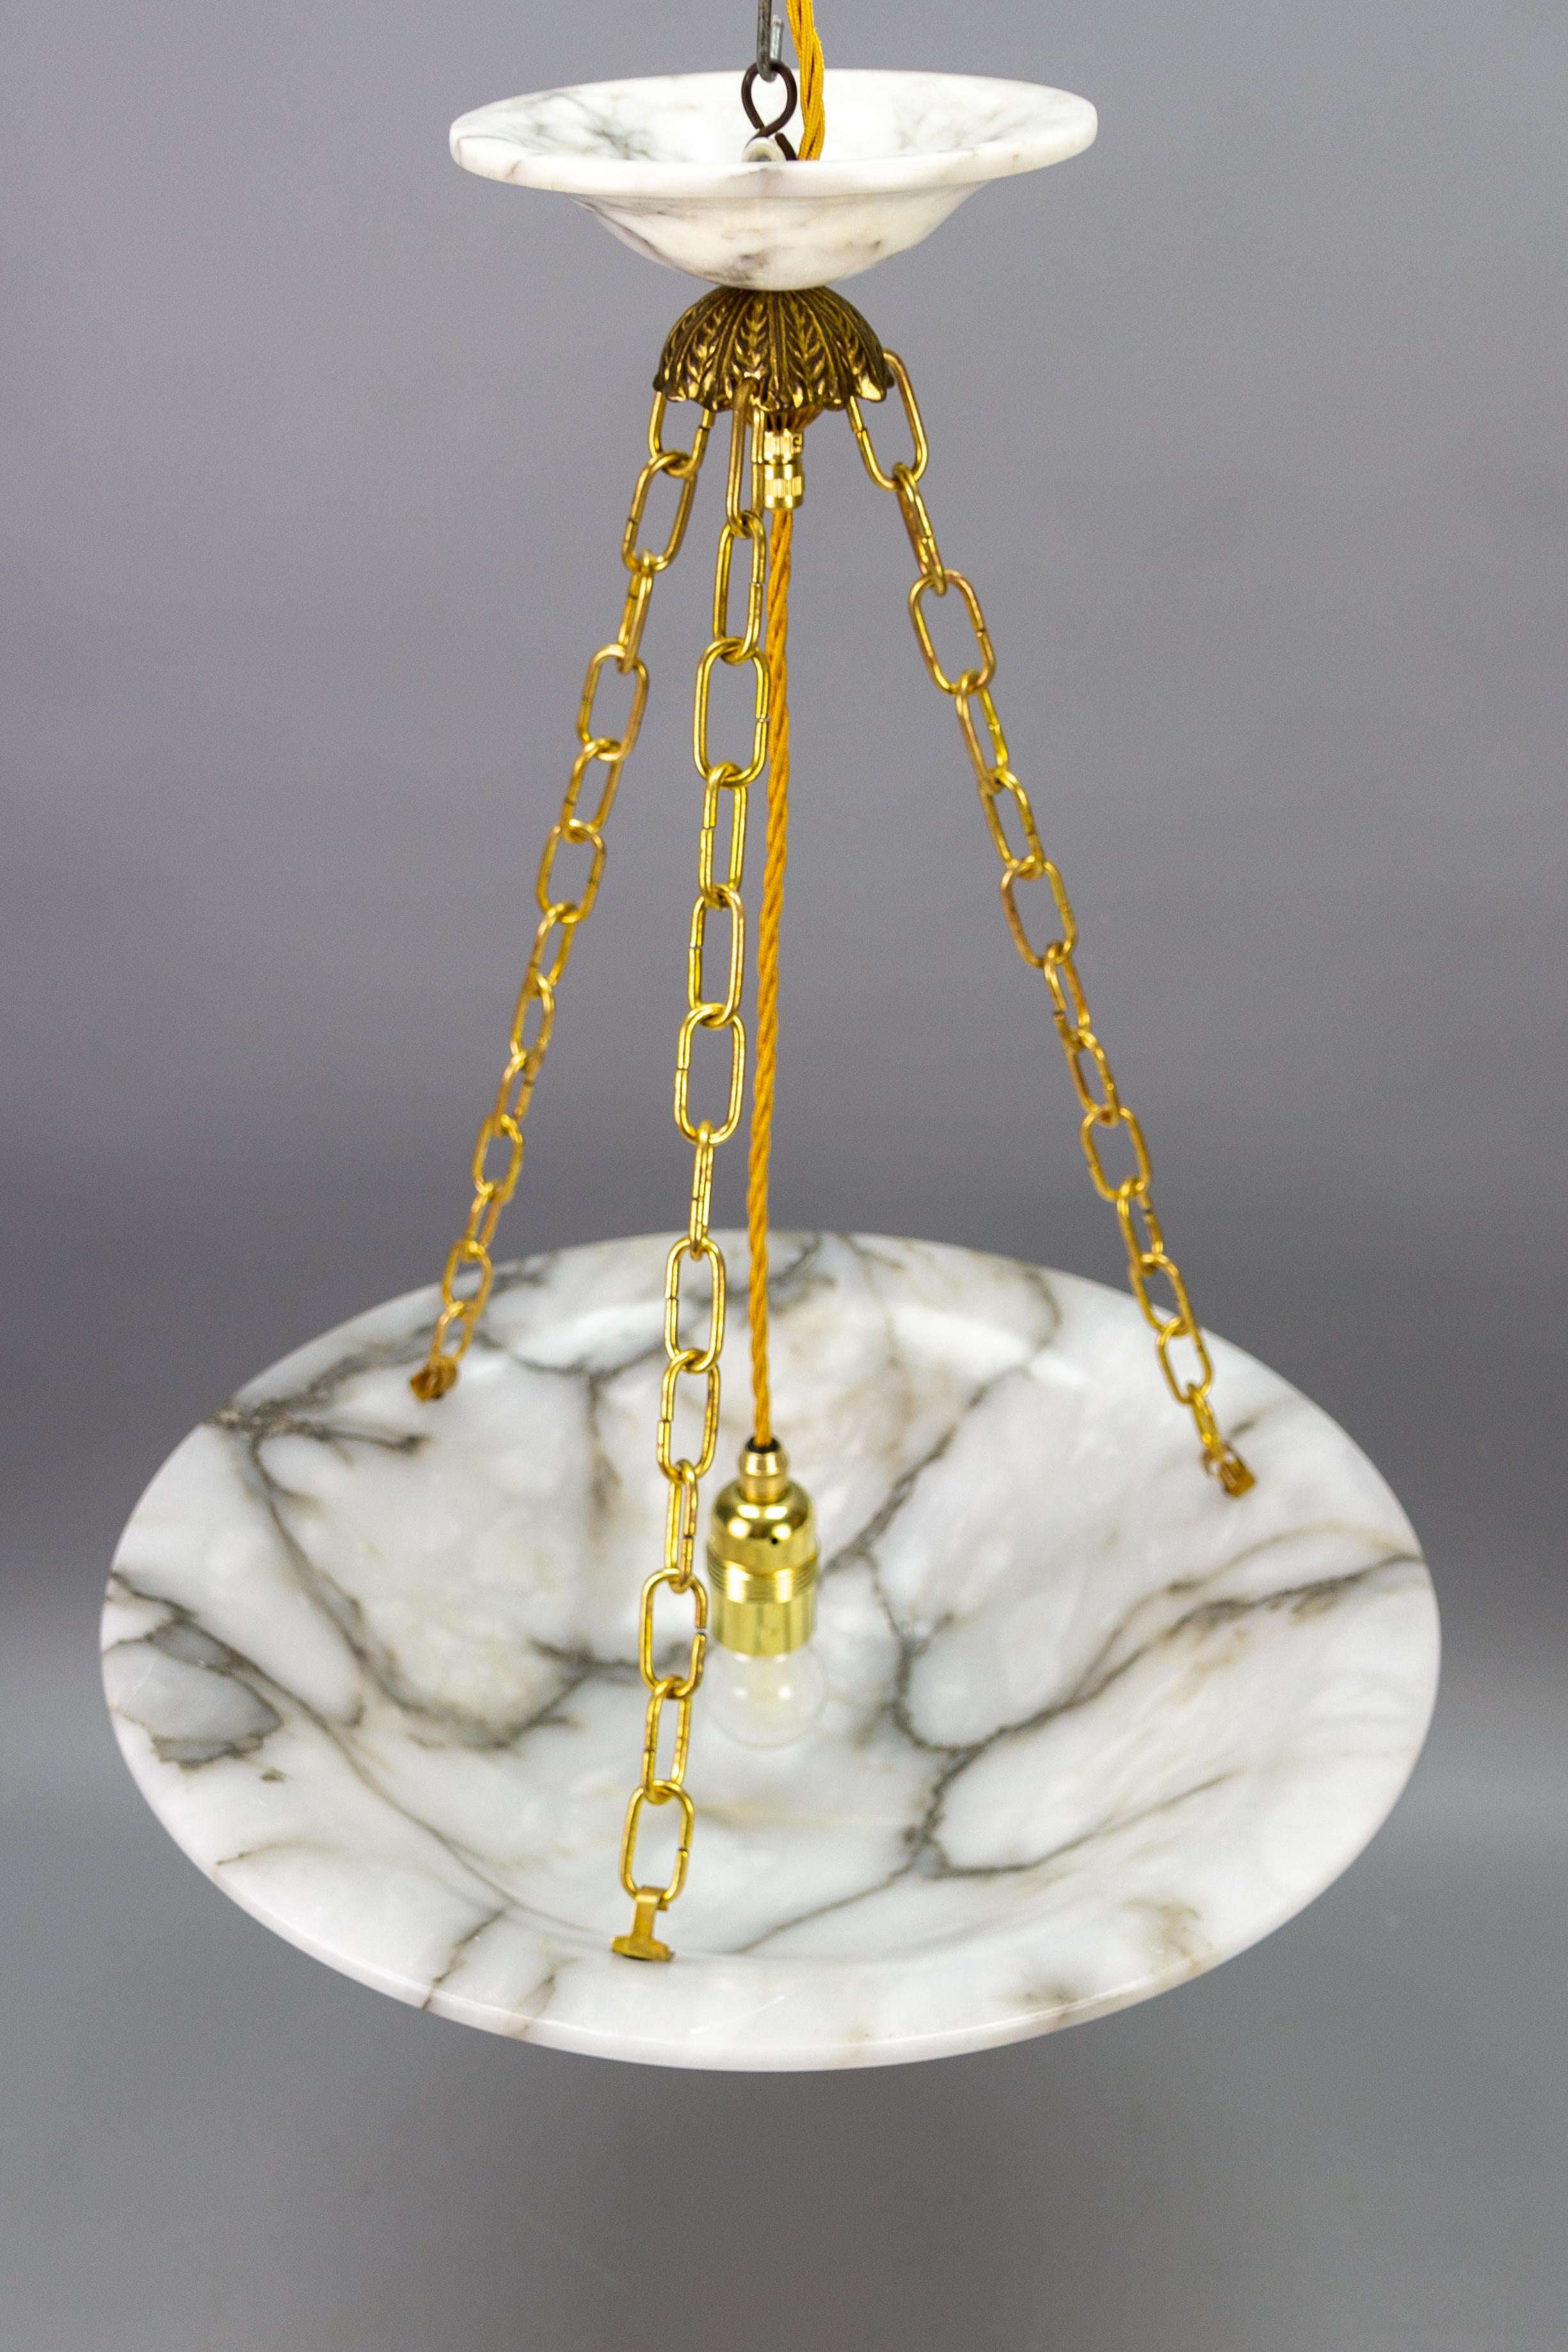 Art Deco White and Black Veined Alabaster and Brass Pendant Light, ca 1920 For Sale 15